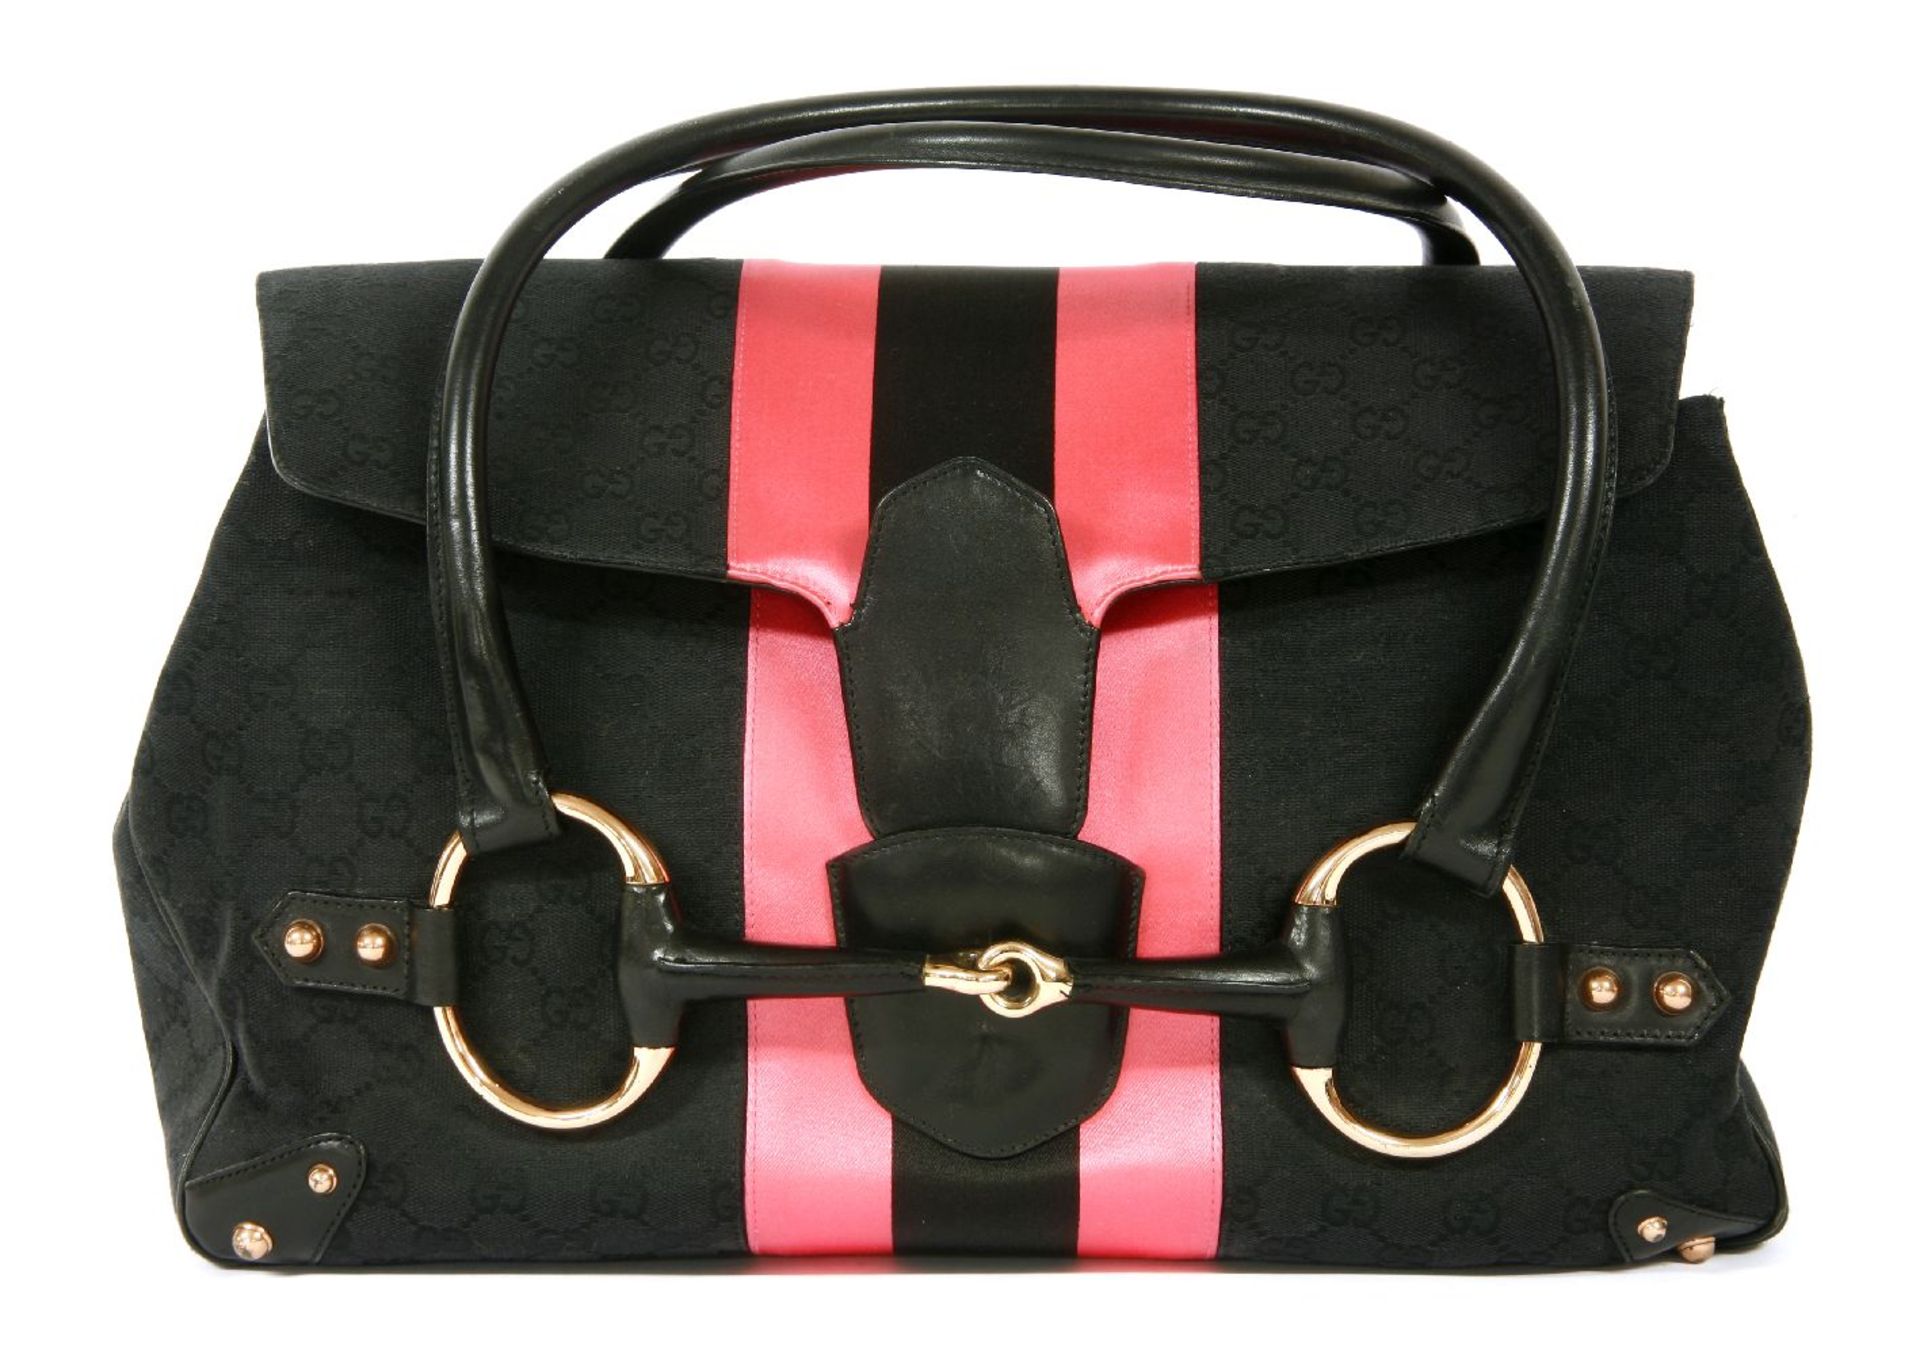 A Gucci by Tom Ford horse bit tote handbag, designed in the maker's black monogram canvas